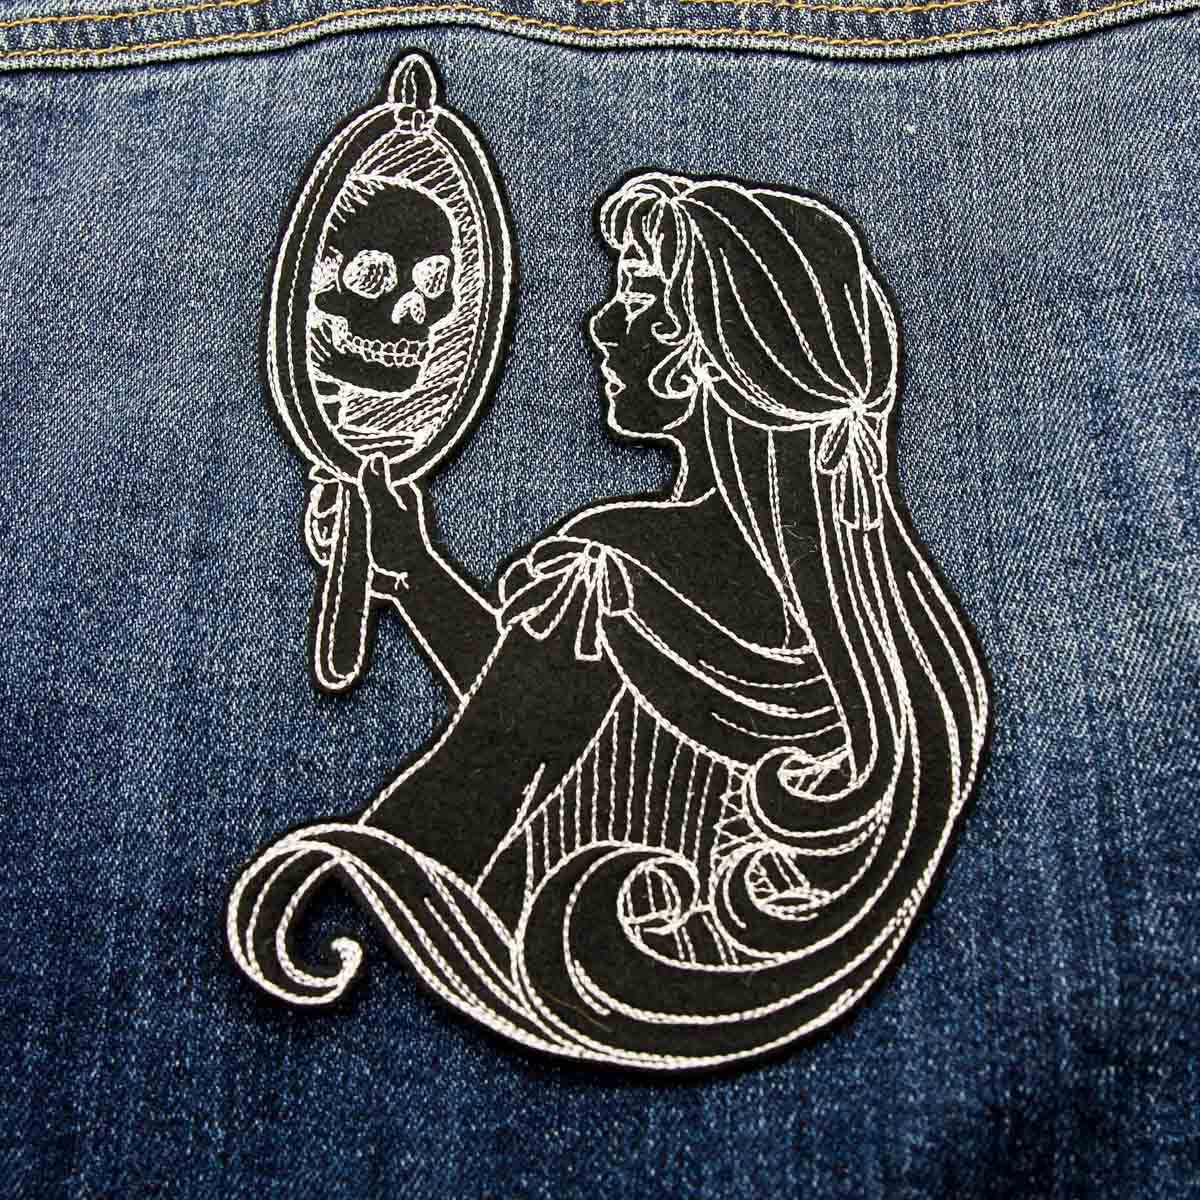 Haunting Reflection Patch